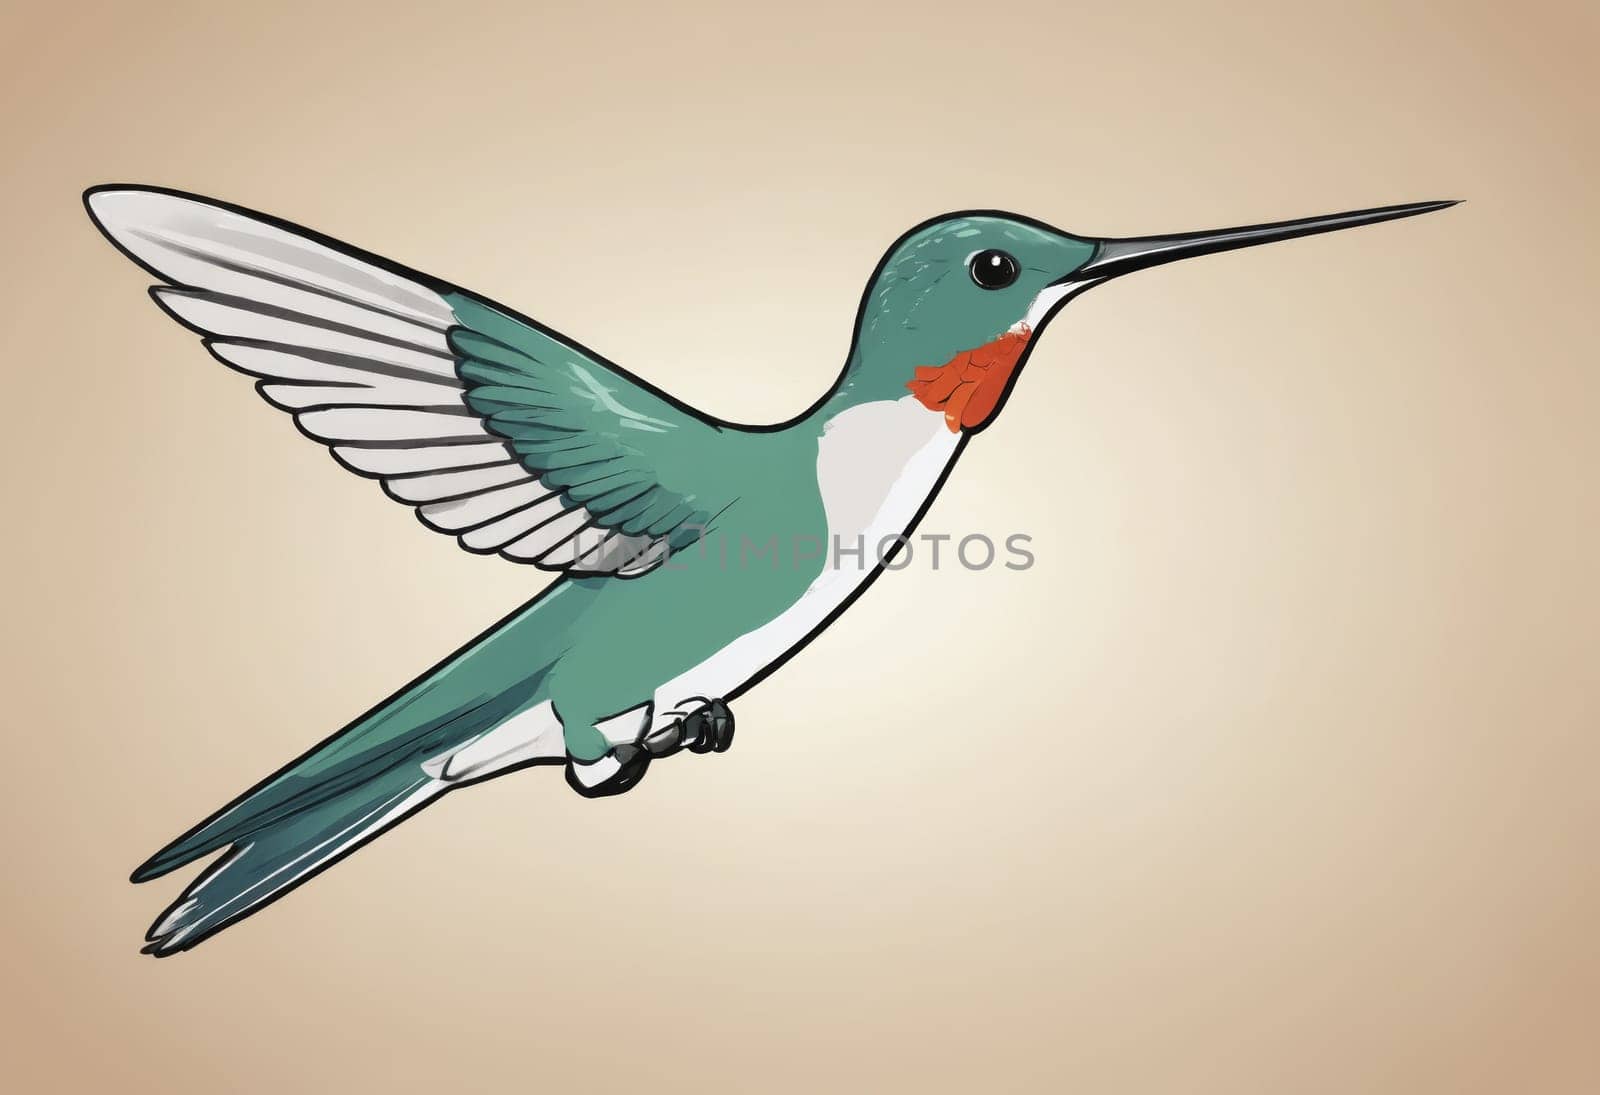 Artistic portrayal of a delicate hummingbird, wings buzzing in a colorful dance of flight.